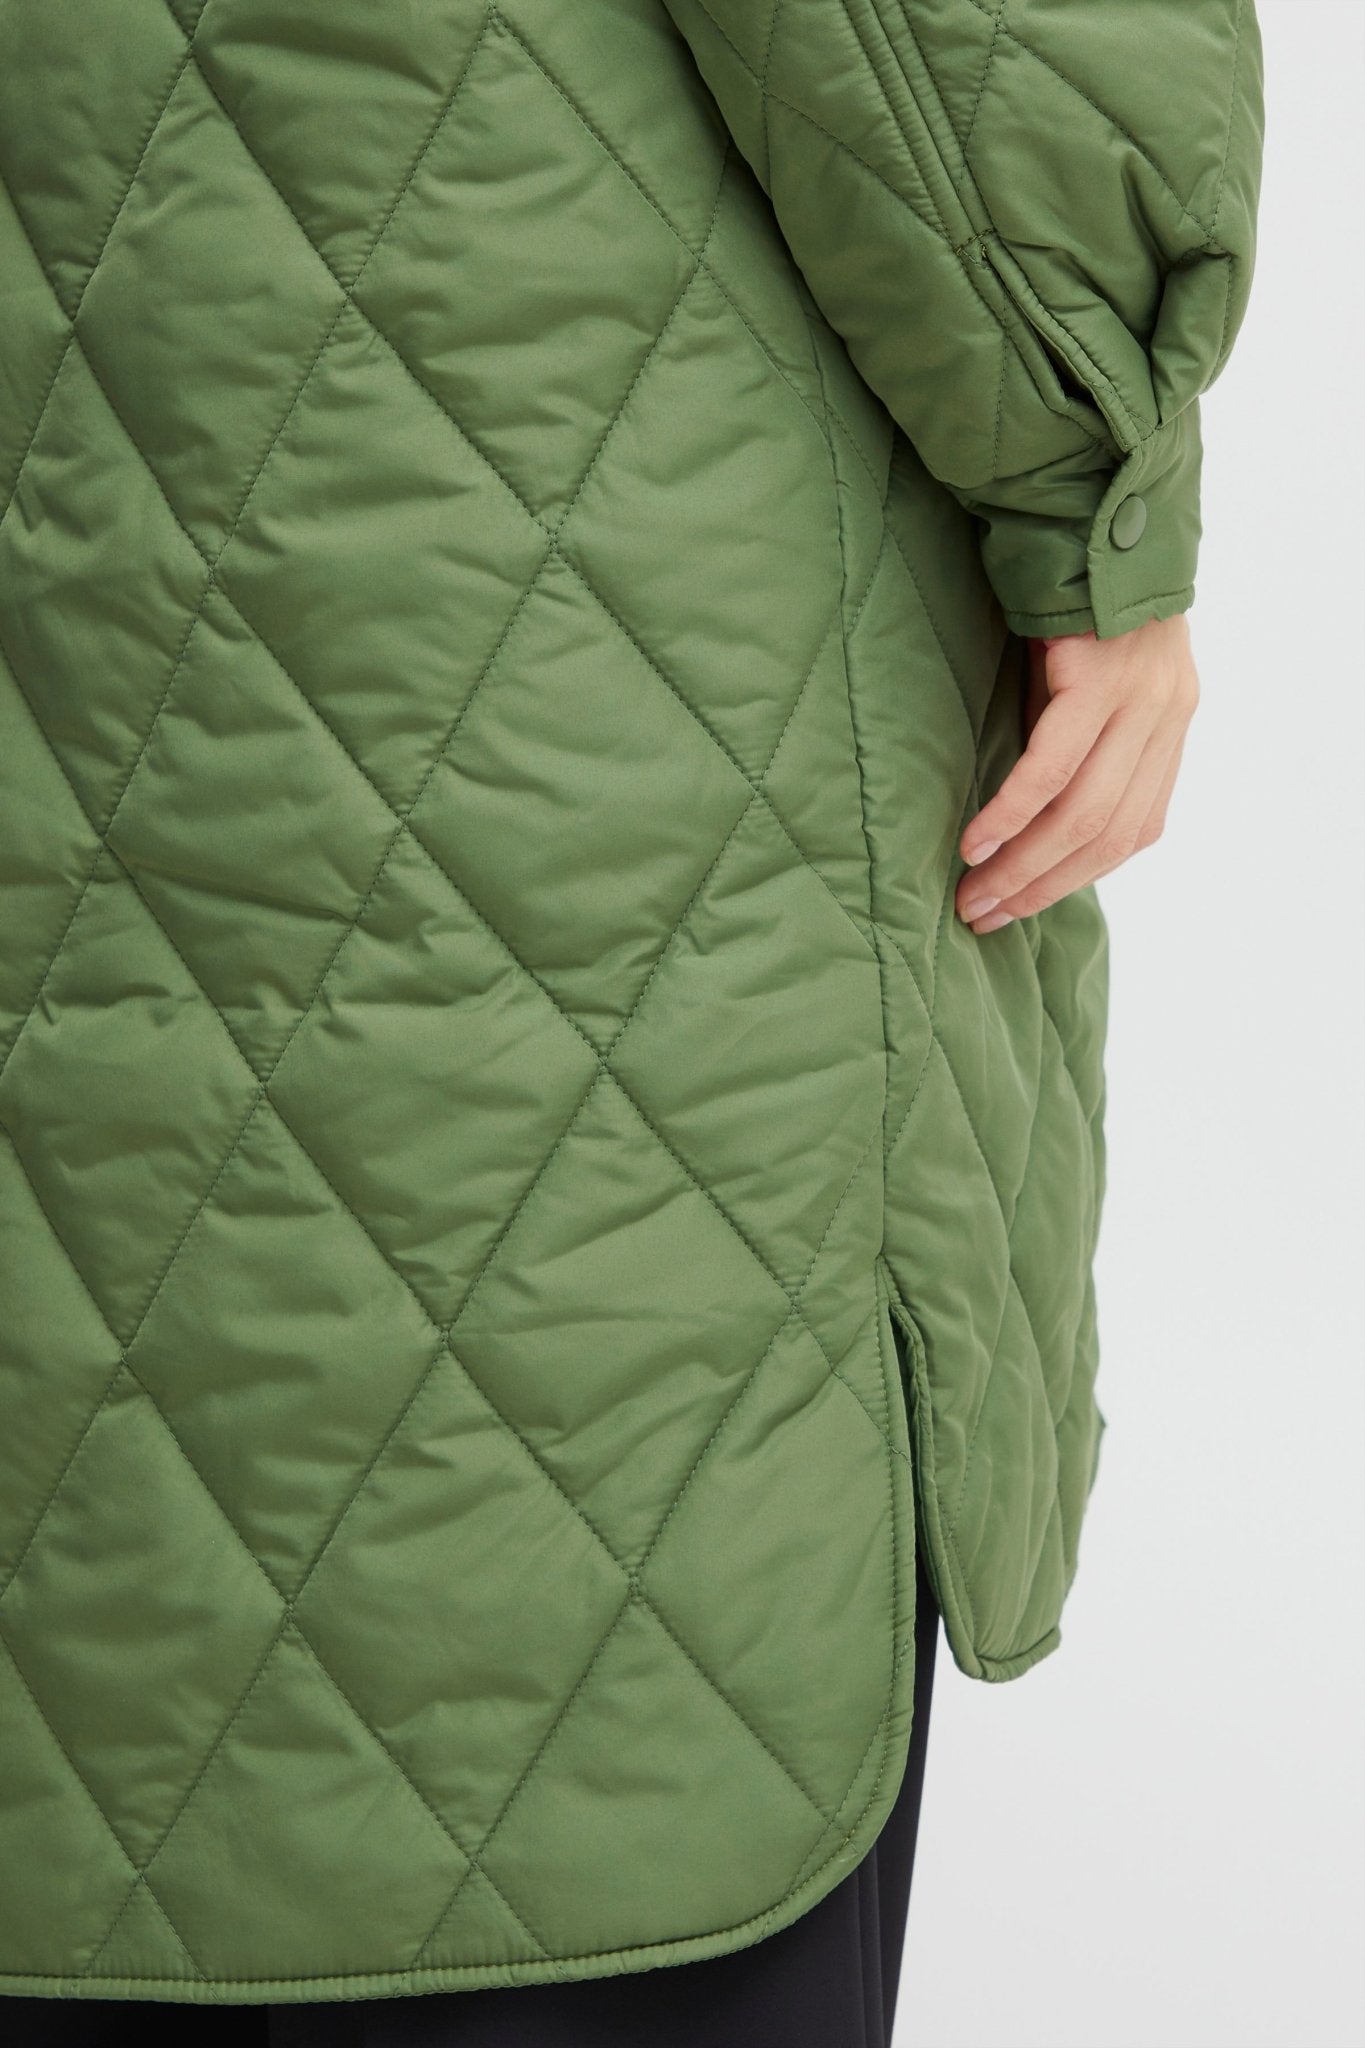 Hansa Long Quilted Jacket - Winter Mint - Blue Sky Clothing & Lingerie